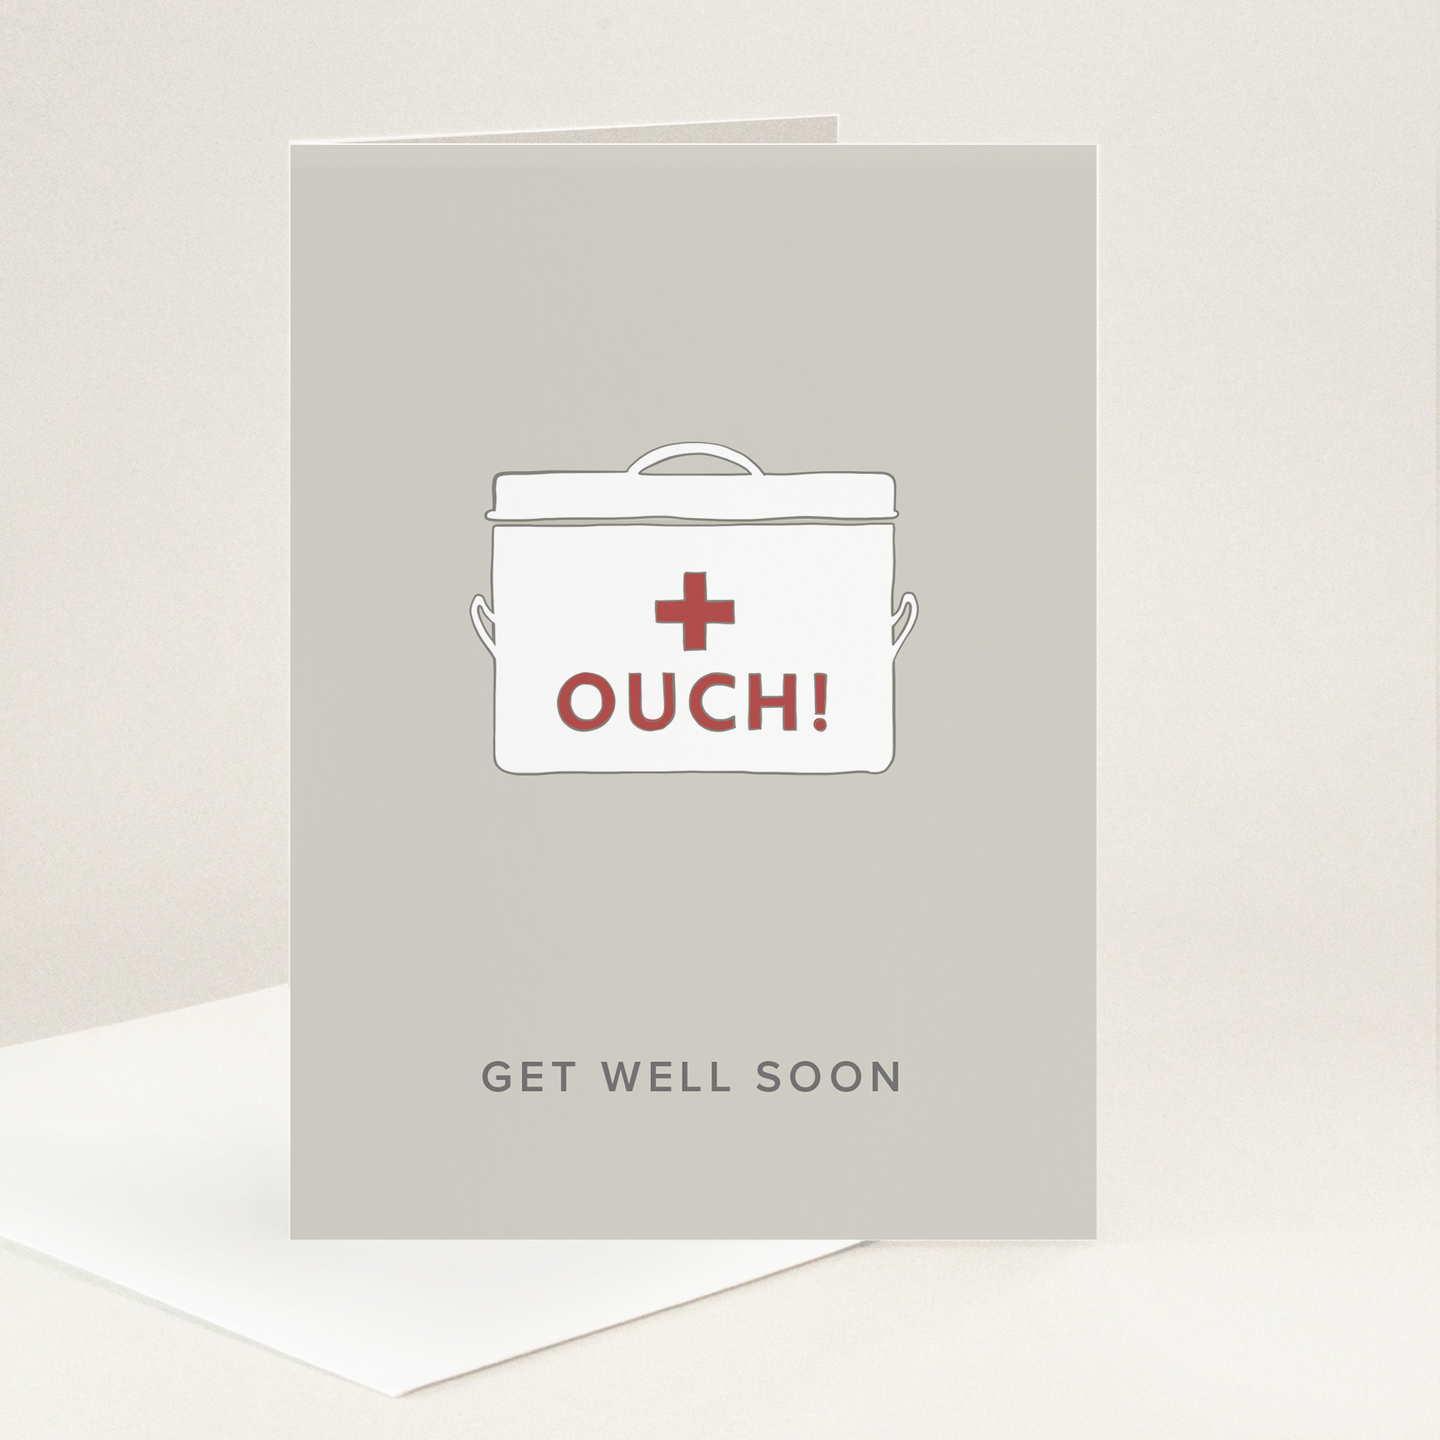 Get Well Soon medicine tine with 'OUCH!' in drawn red capital letters